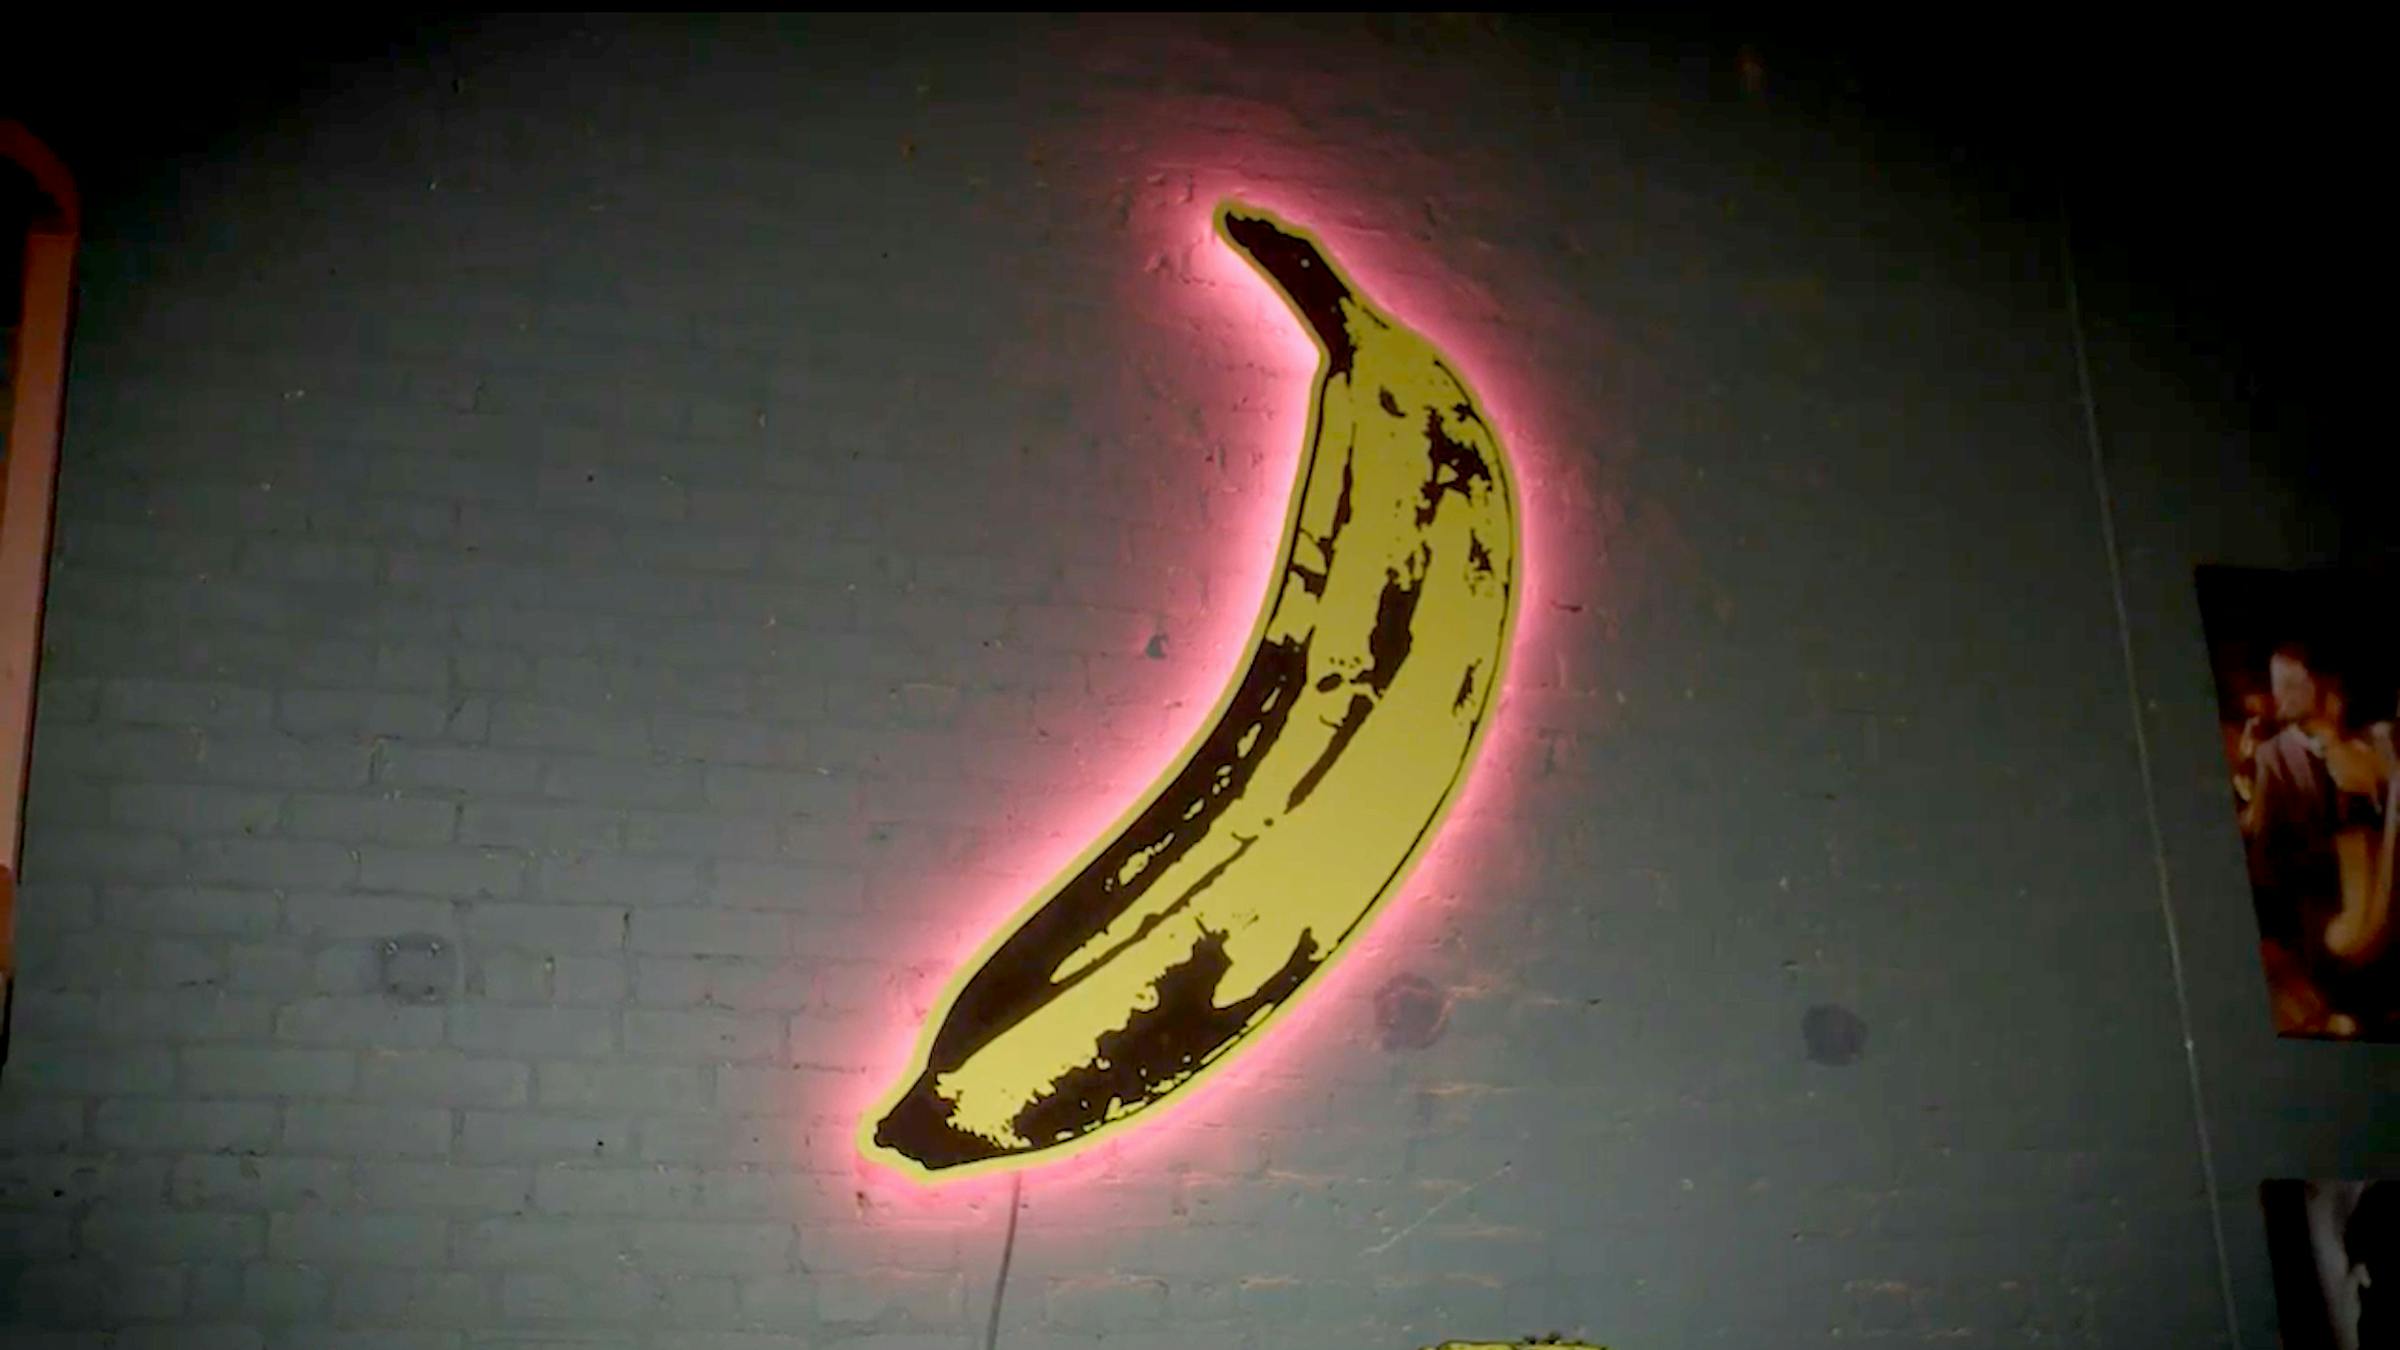 New York's Velvet Underground Experience Shows How One Band Can Change The Face Of Rock And Roll